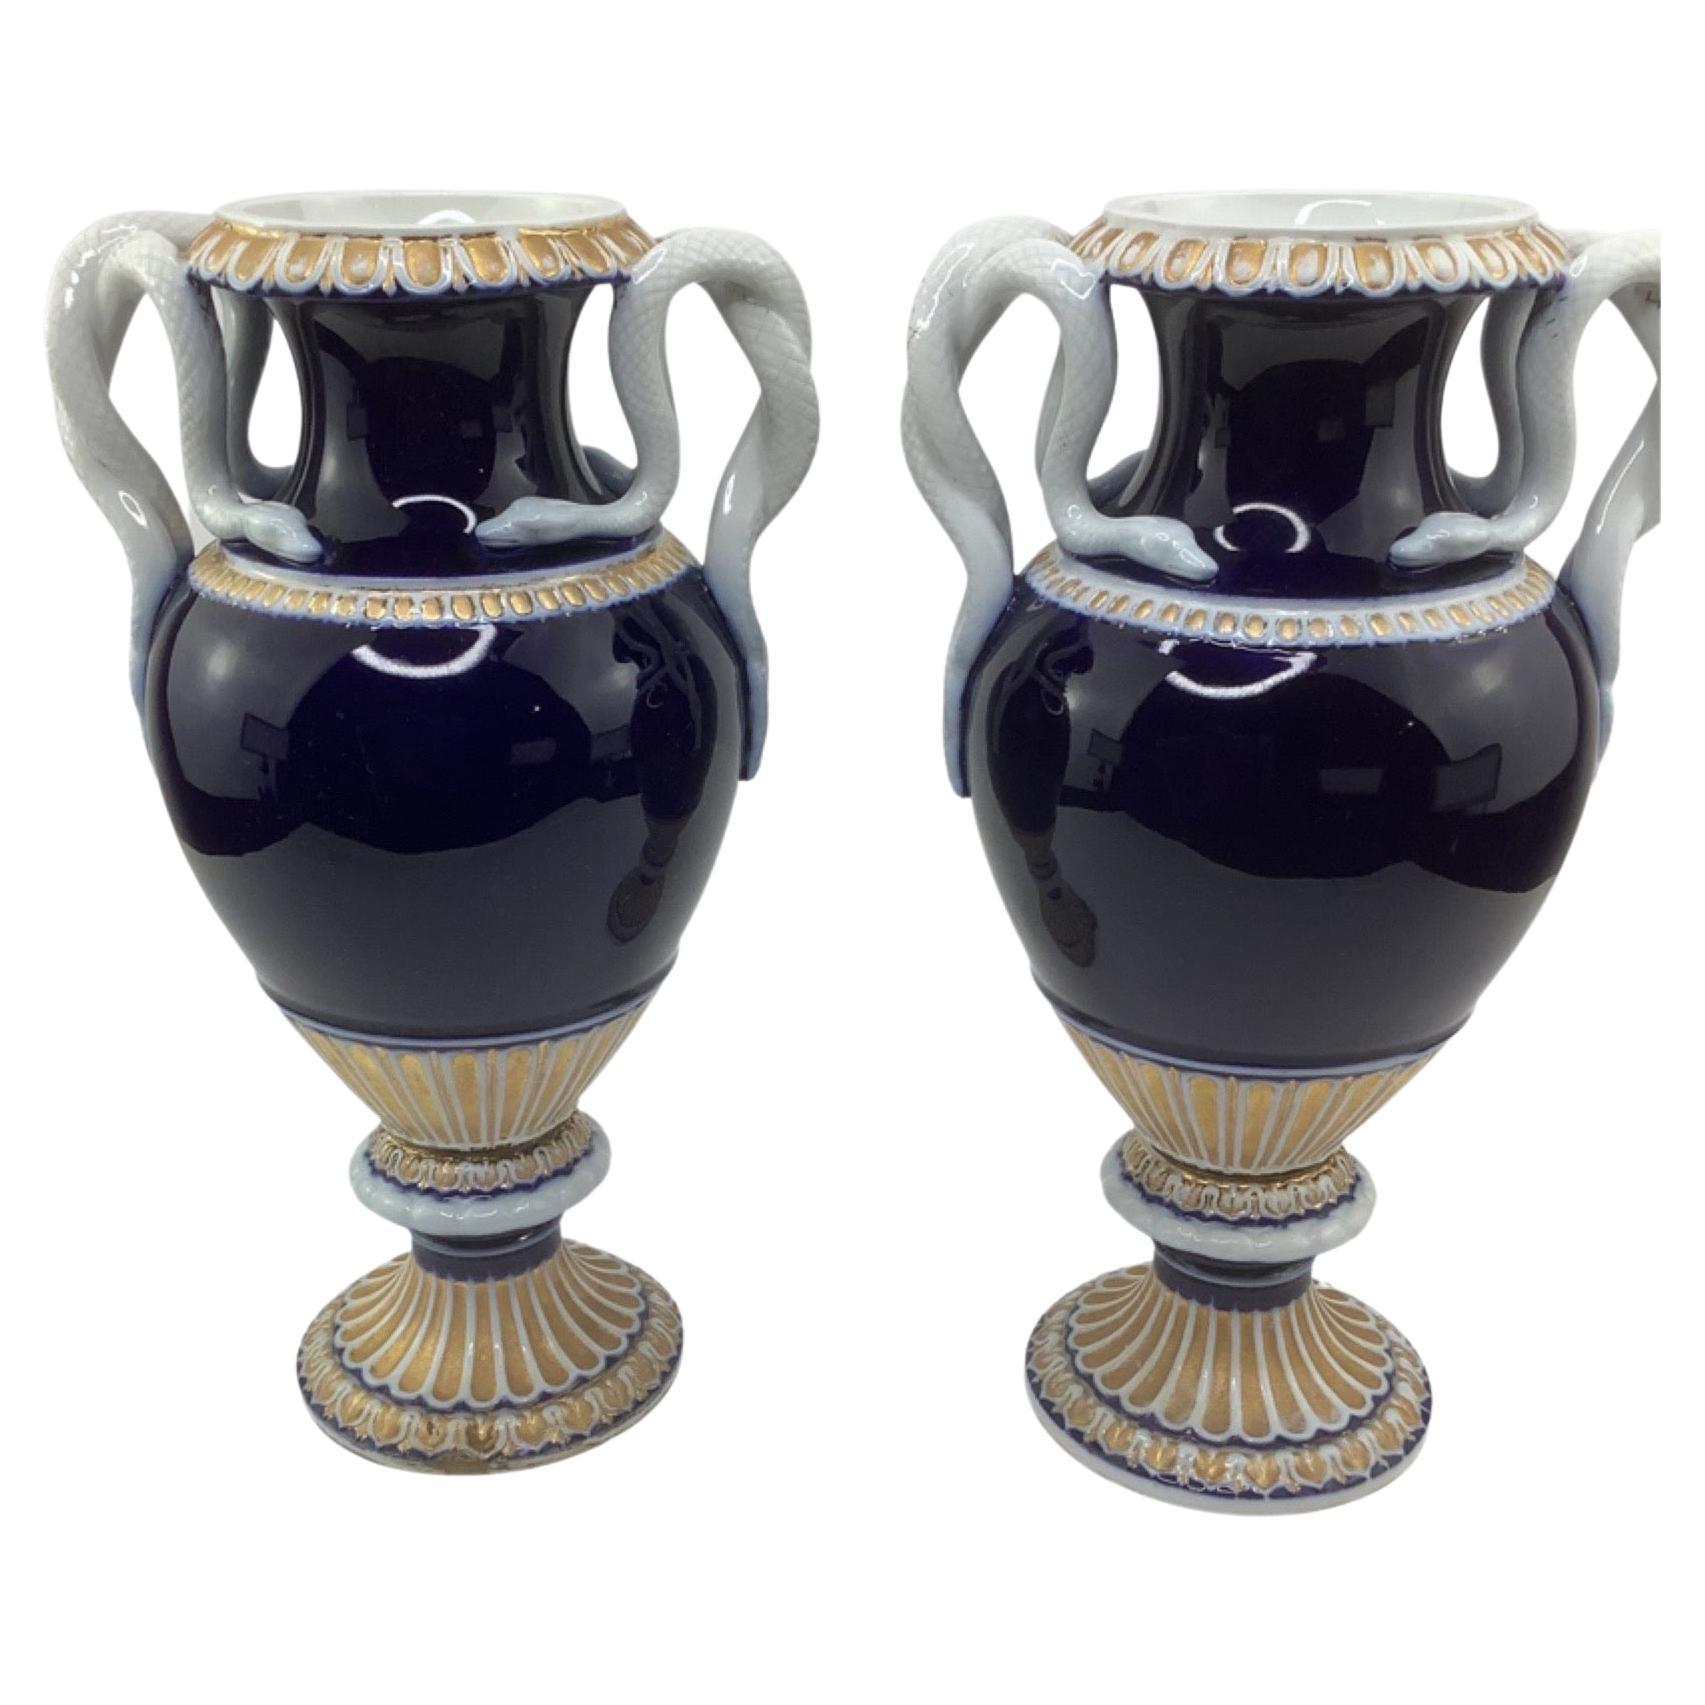 Pair of 19th century cobalt blue Meissen serpent vases in the Neo-Classical style. Boldly colored cobalt urns with white intertwined double scrolled serpent handles. Urns sits atop round gilt accented bases. Exceptional quality with Meissen crossed